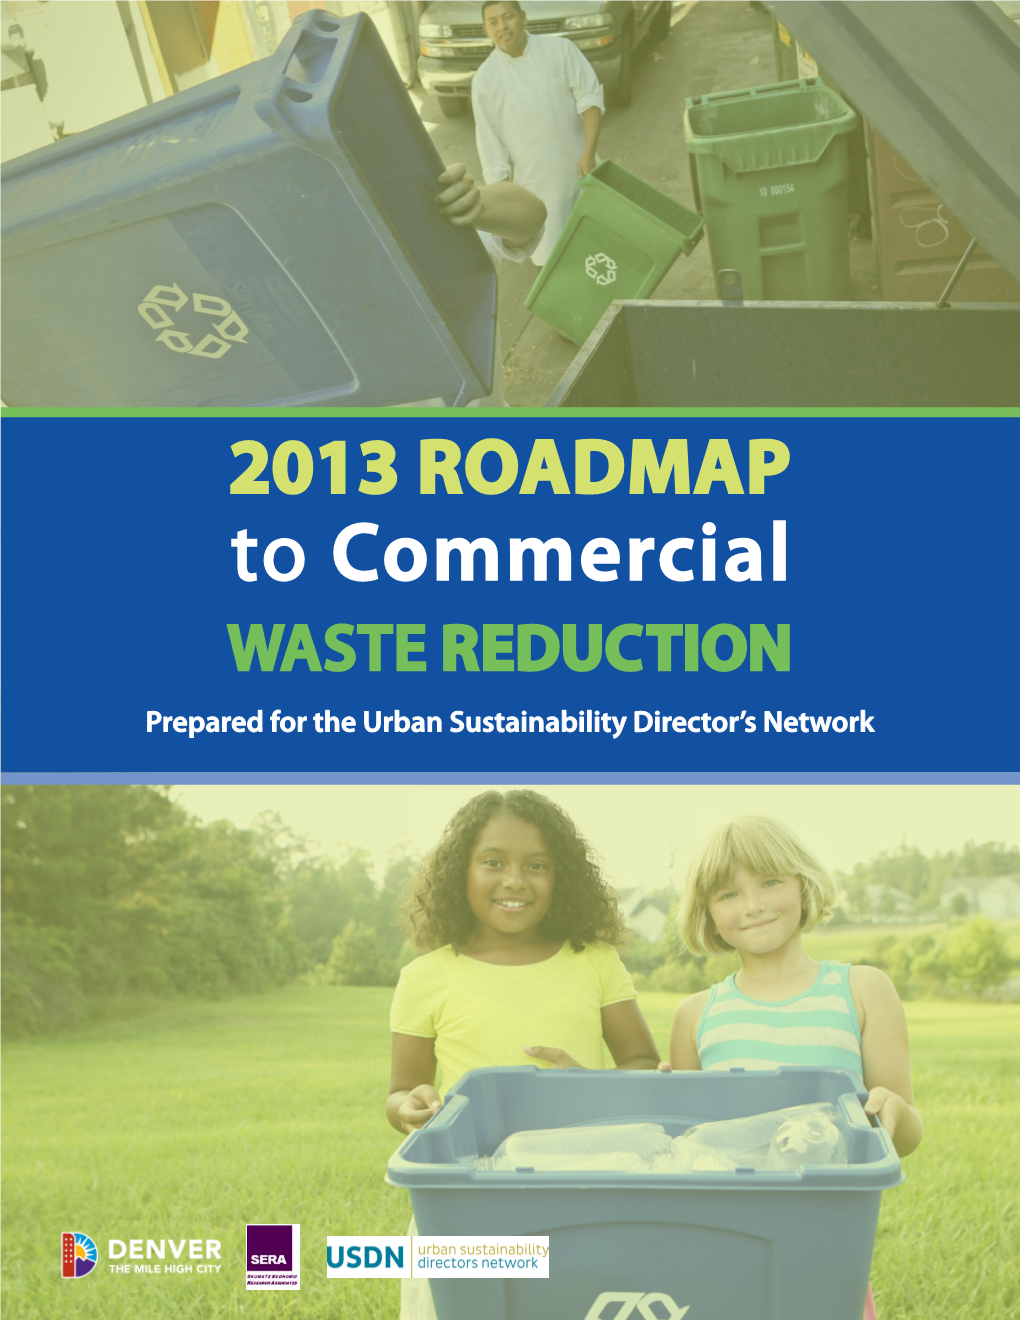 To Commercial WASTE REDUCTION Prepared for the Urban Sustainability Director’S Network